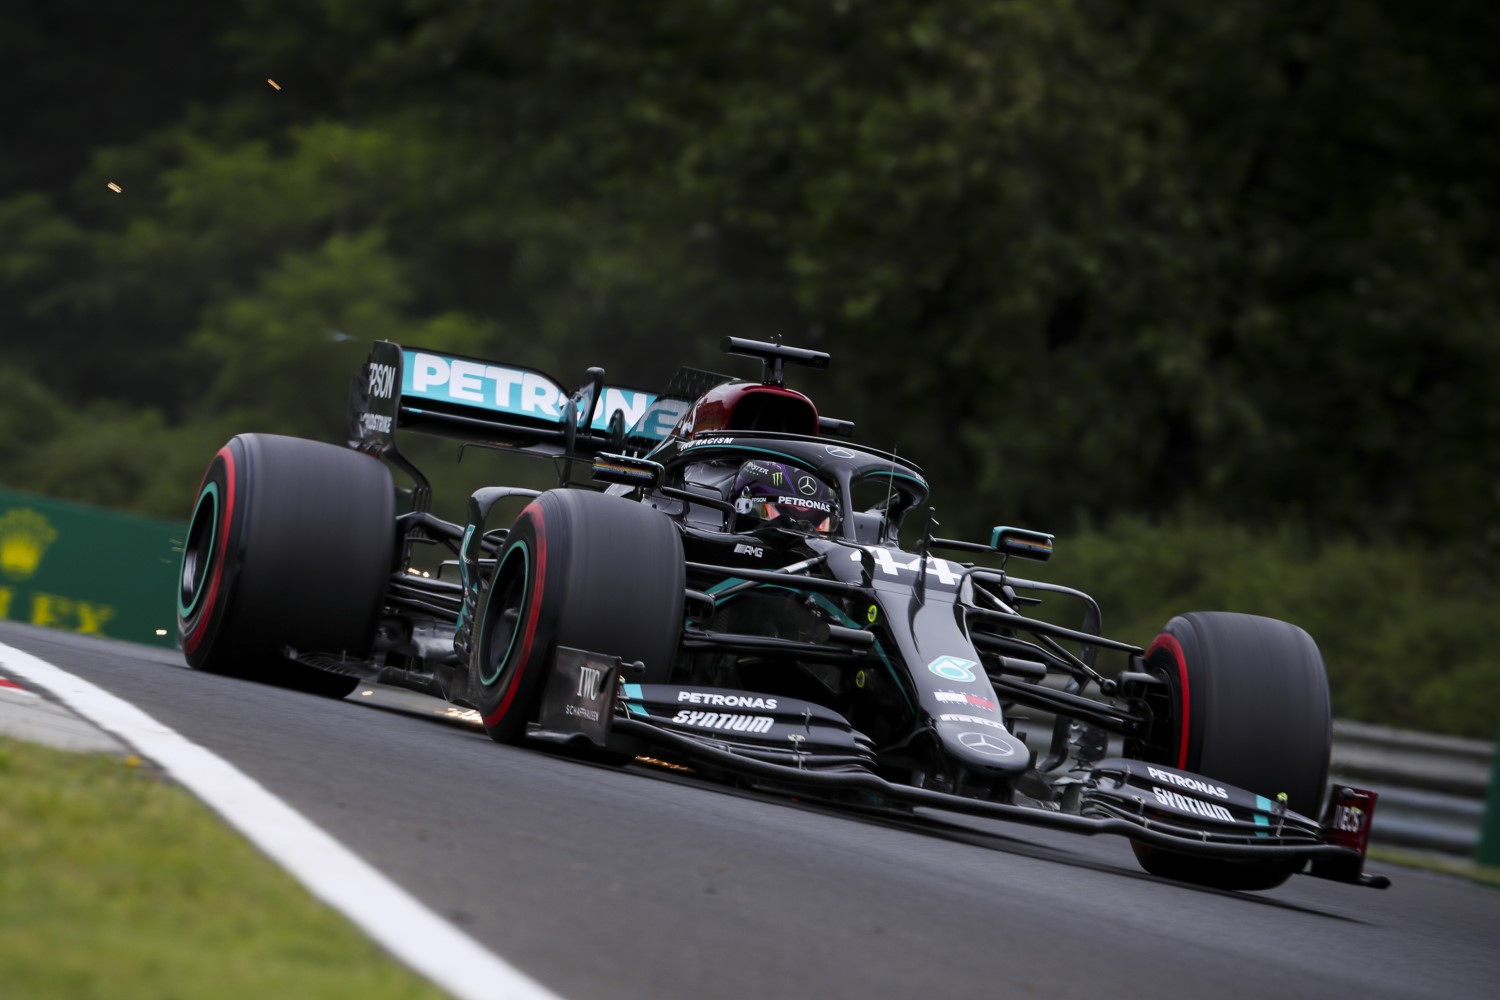 Lewis Hamilton would be well served by sticking to driving, which he does best